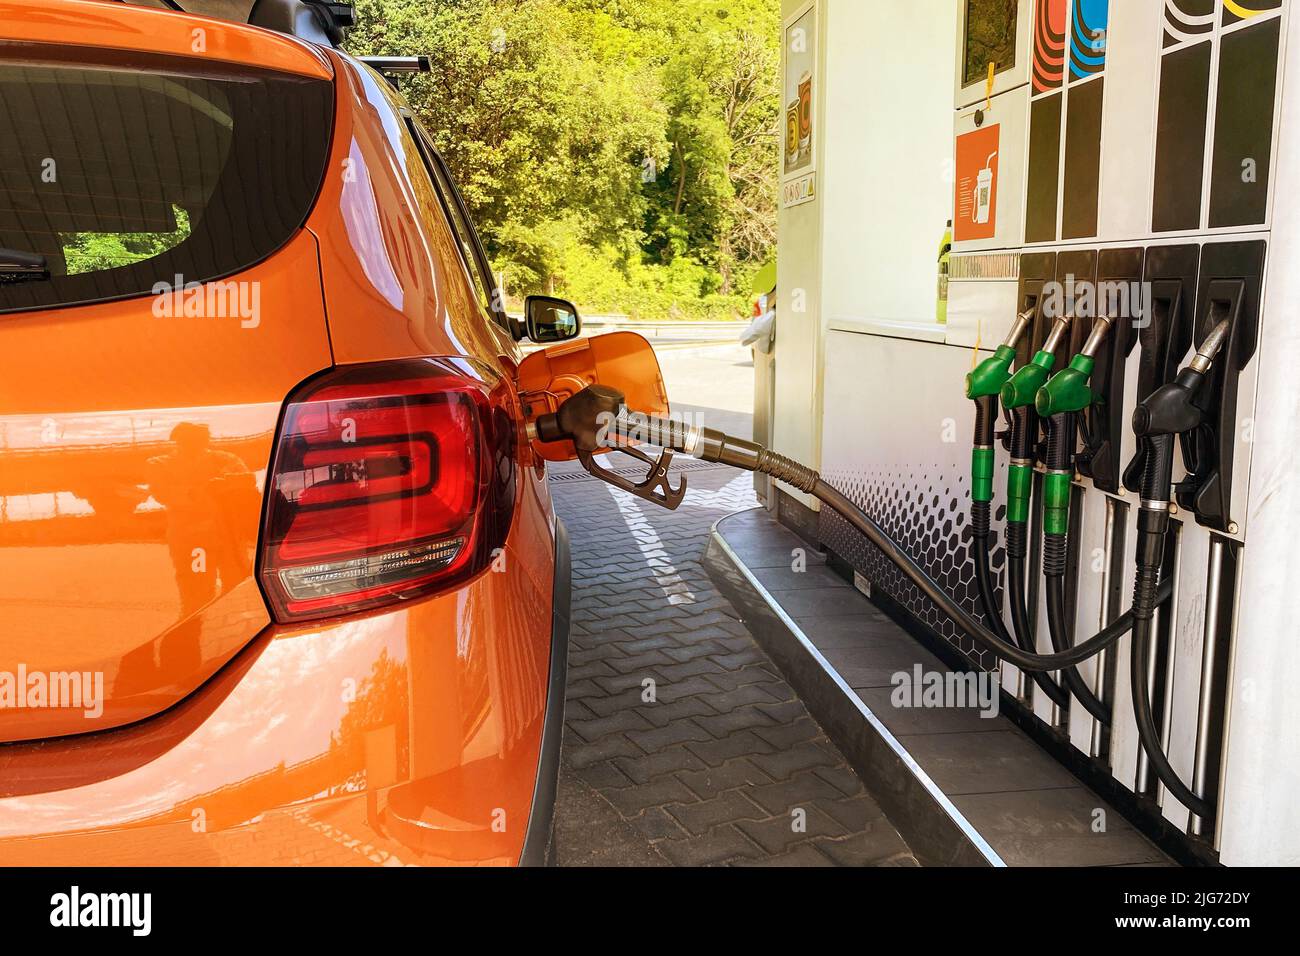 Fill car with fuel in petrol station. Pumping gasoline fuel in orange car at a gas station in city. Stock Photo